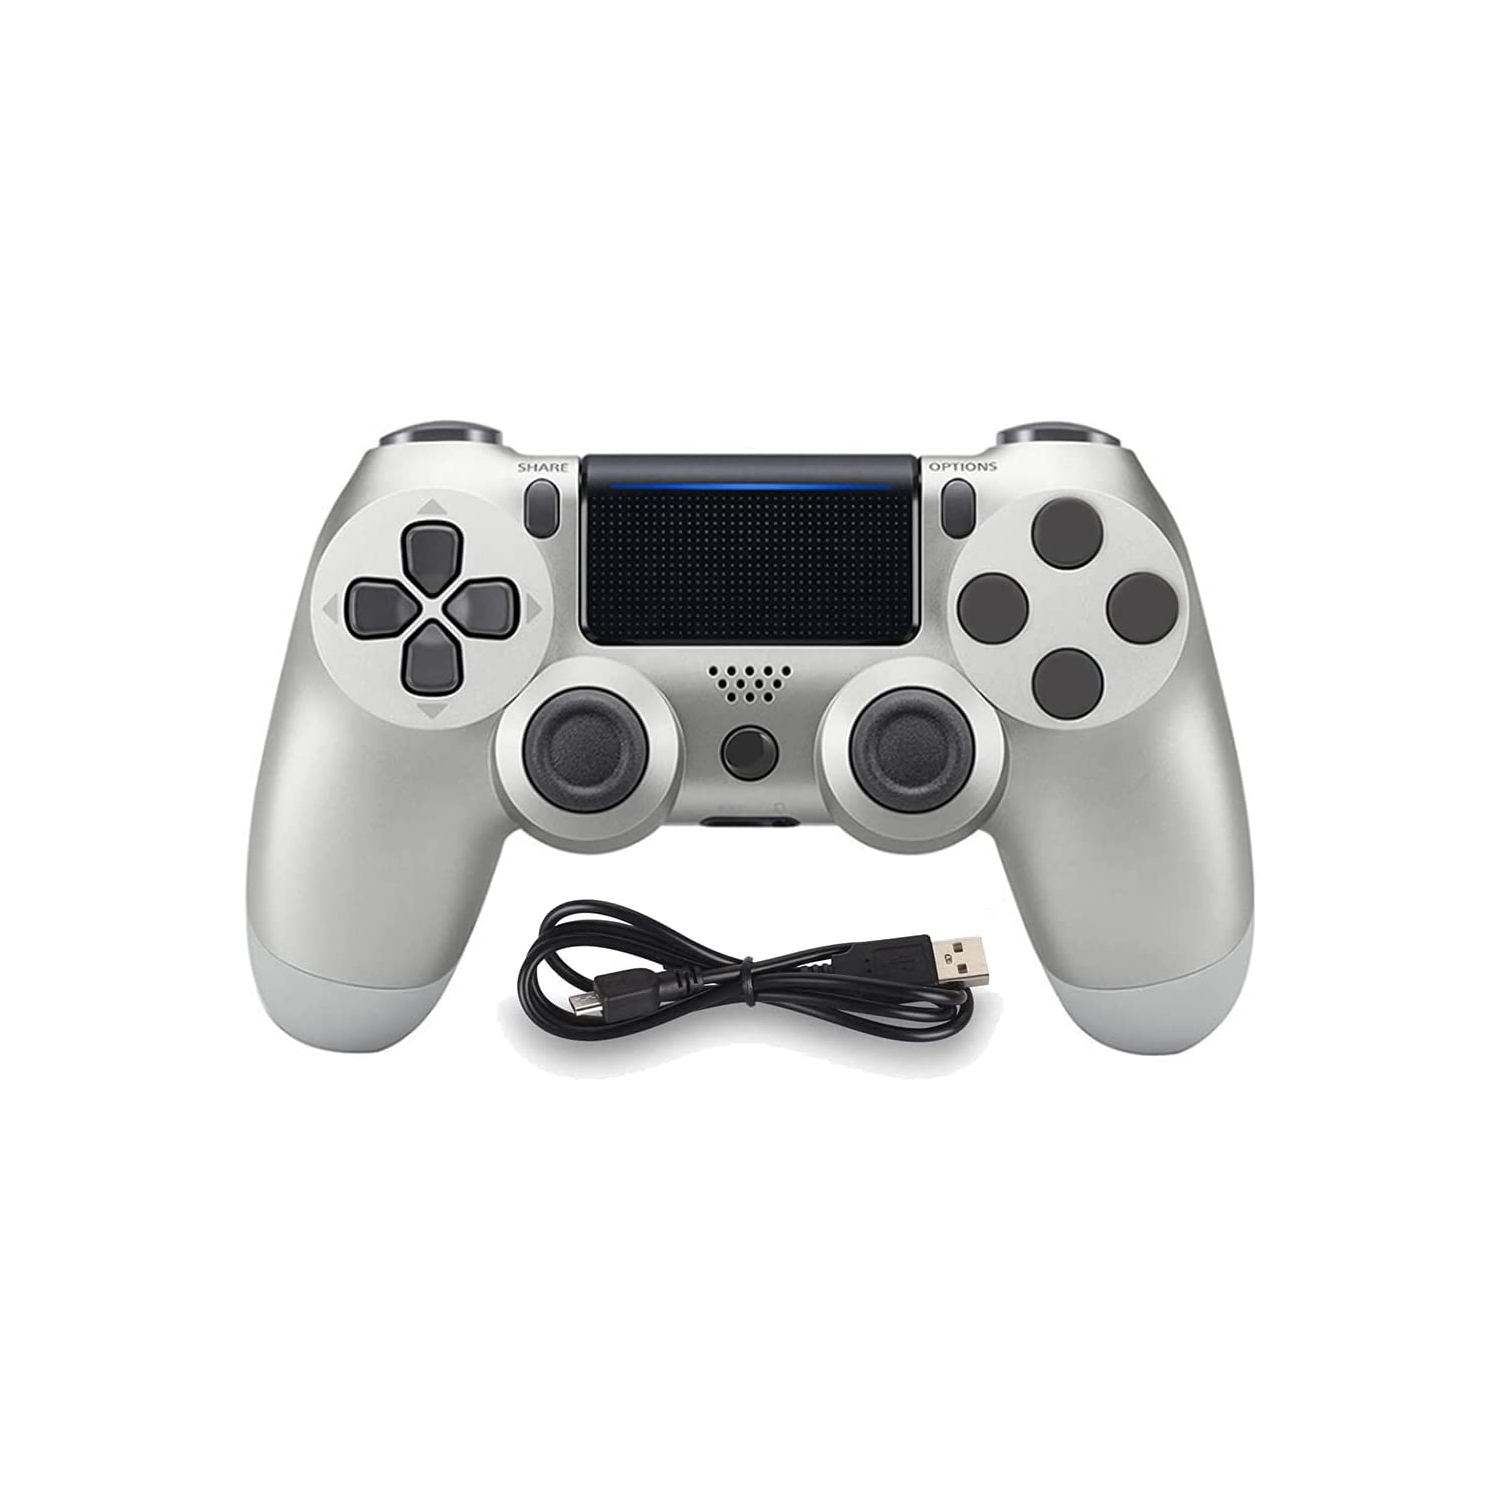 Wireless Controller Compatible for PS4 Playstation 4 / Slim/Pro Console, Double Vibration, 6-Axis Gyro Sensor, Speaker, Built-in Audio Jack with Charging Cable (Silver)